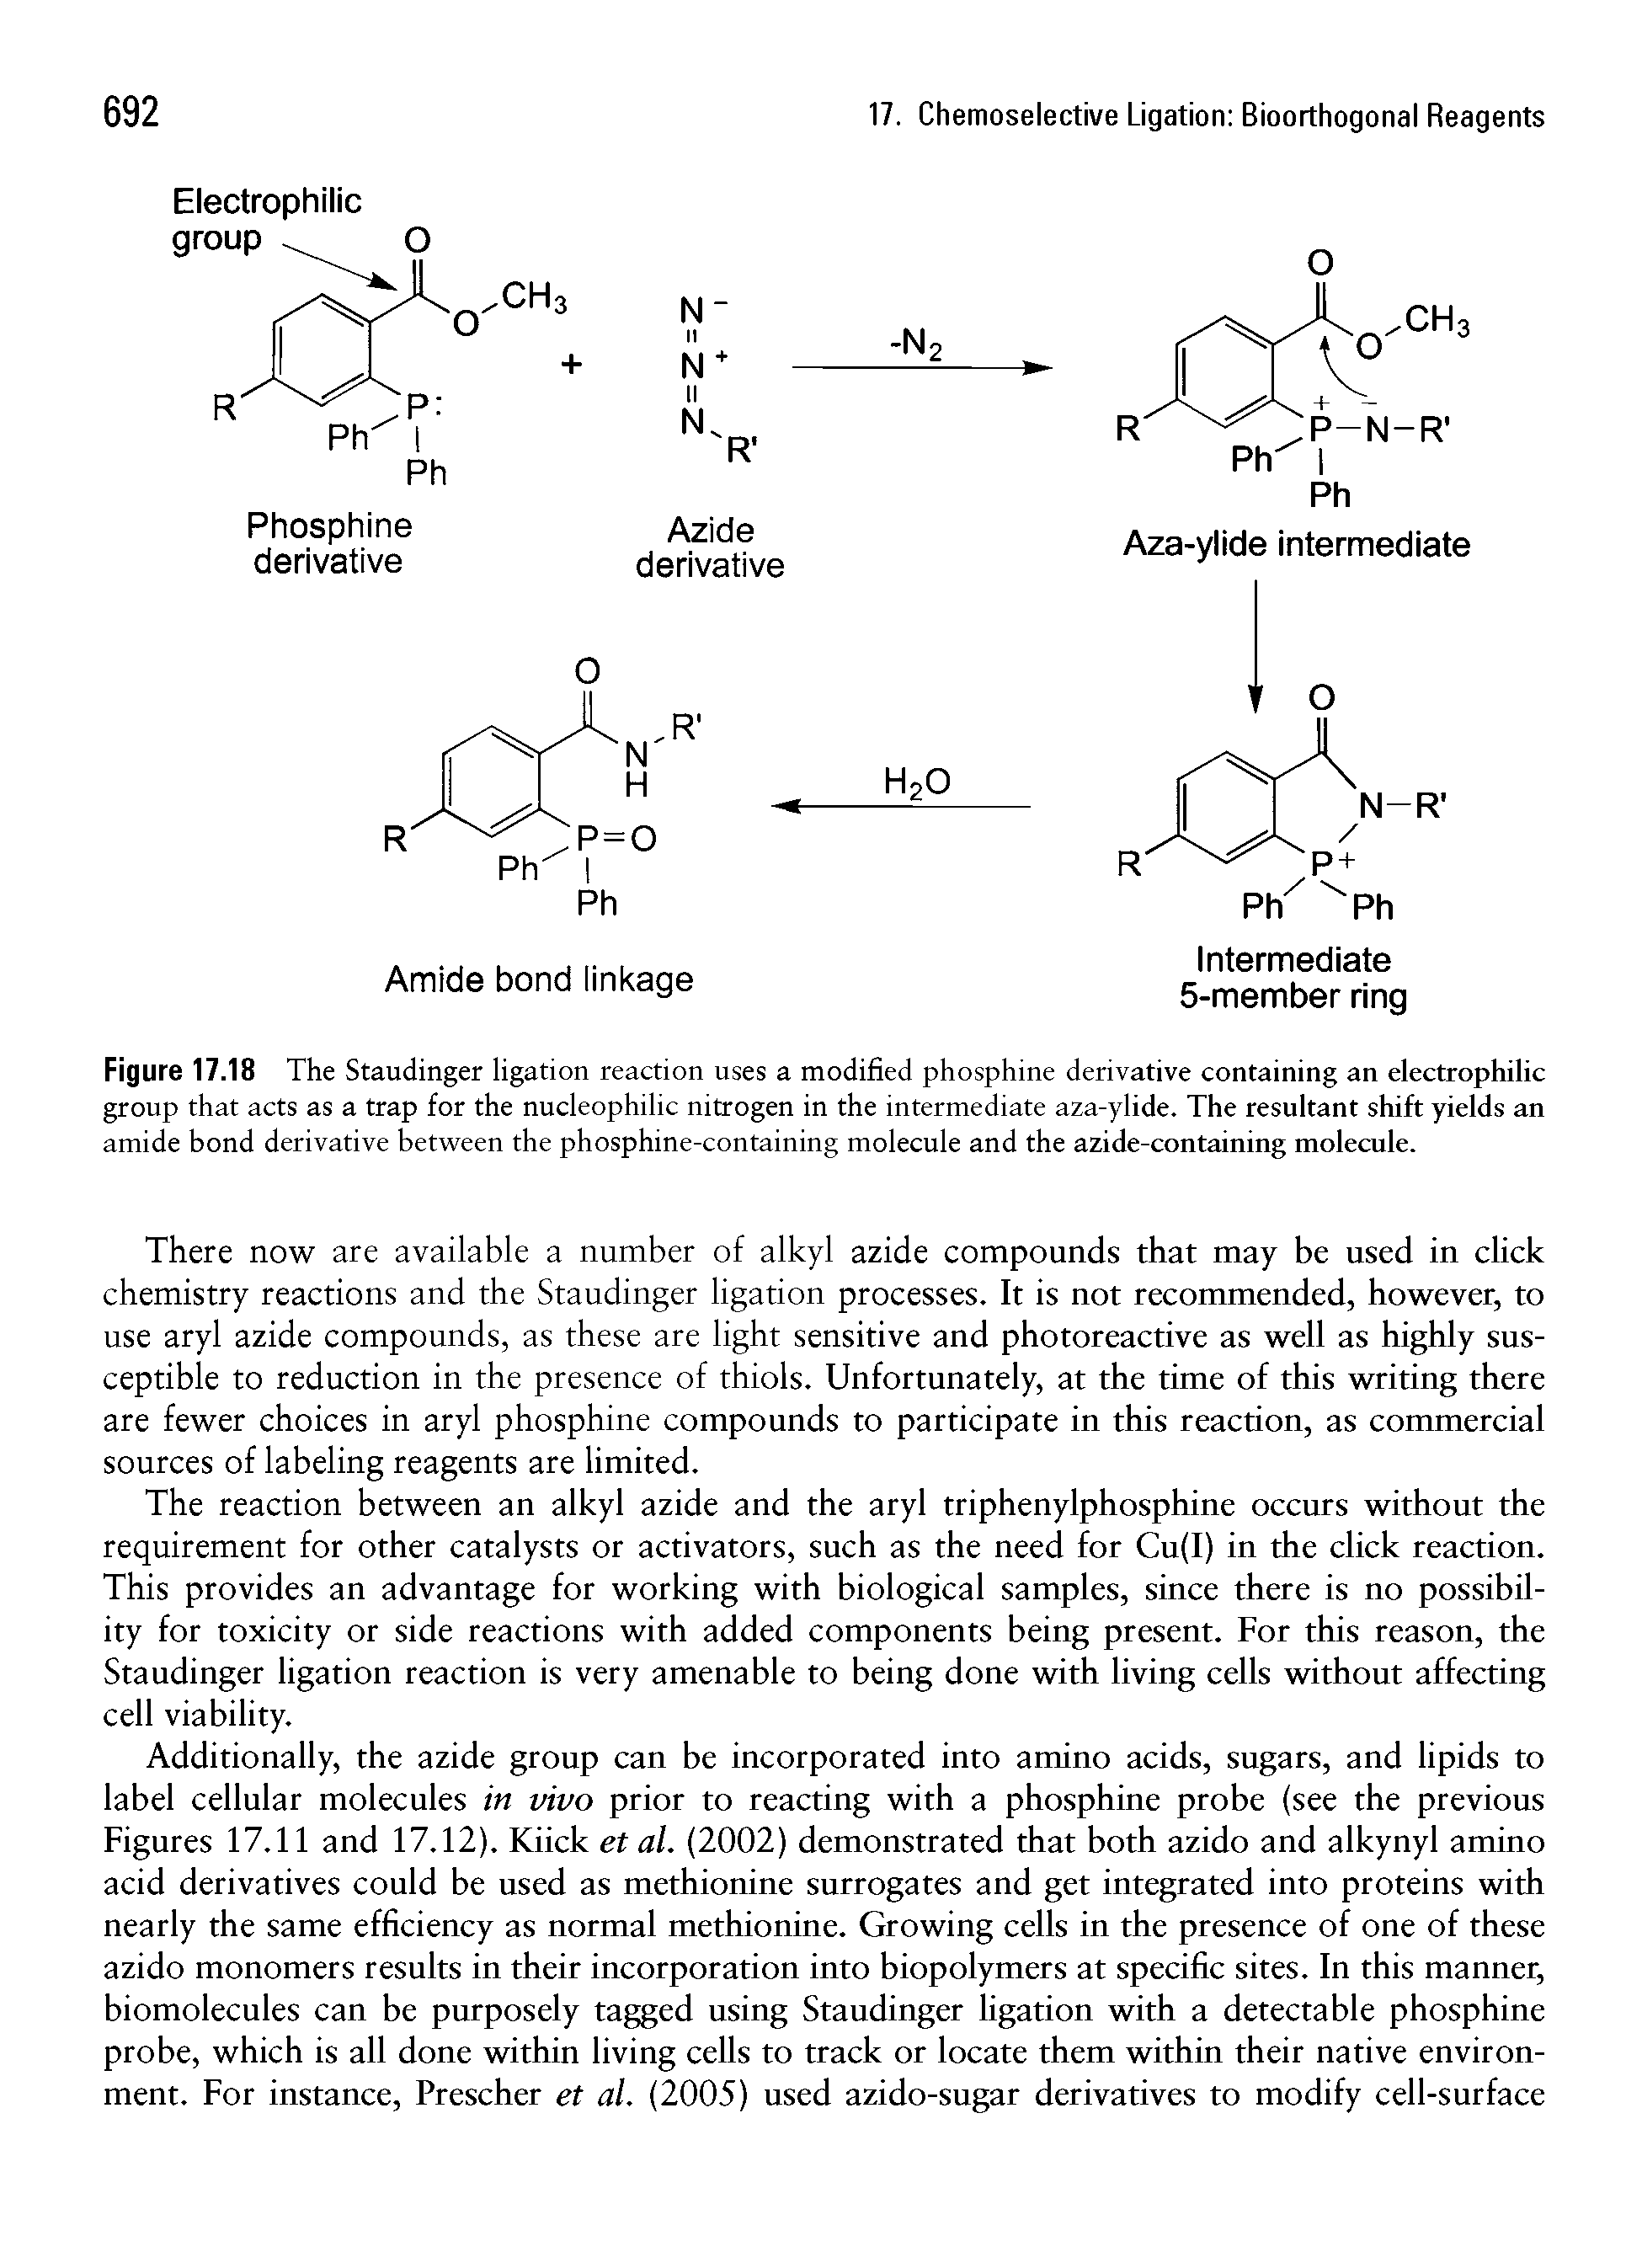 Figure 17.18 The Staudinger ligation reaction uses a modified phosphine derivative containing an electrophilic group that acts as a trap for the nucleophilic nitrogen in the intermediate aza-ylide. The resultant shift yields an amide bond derivative between the phosphine-containing molecule and the azide-containing molecule.